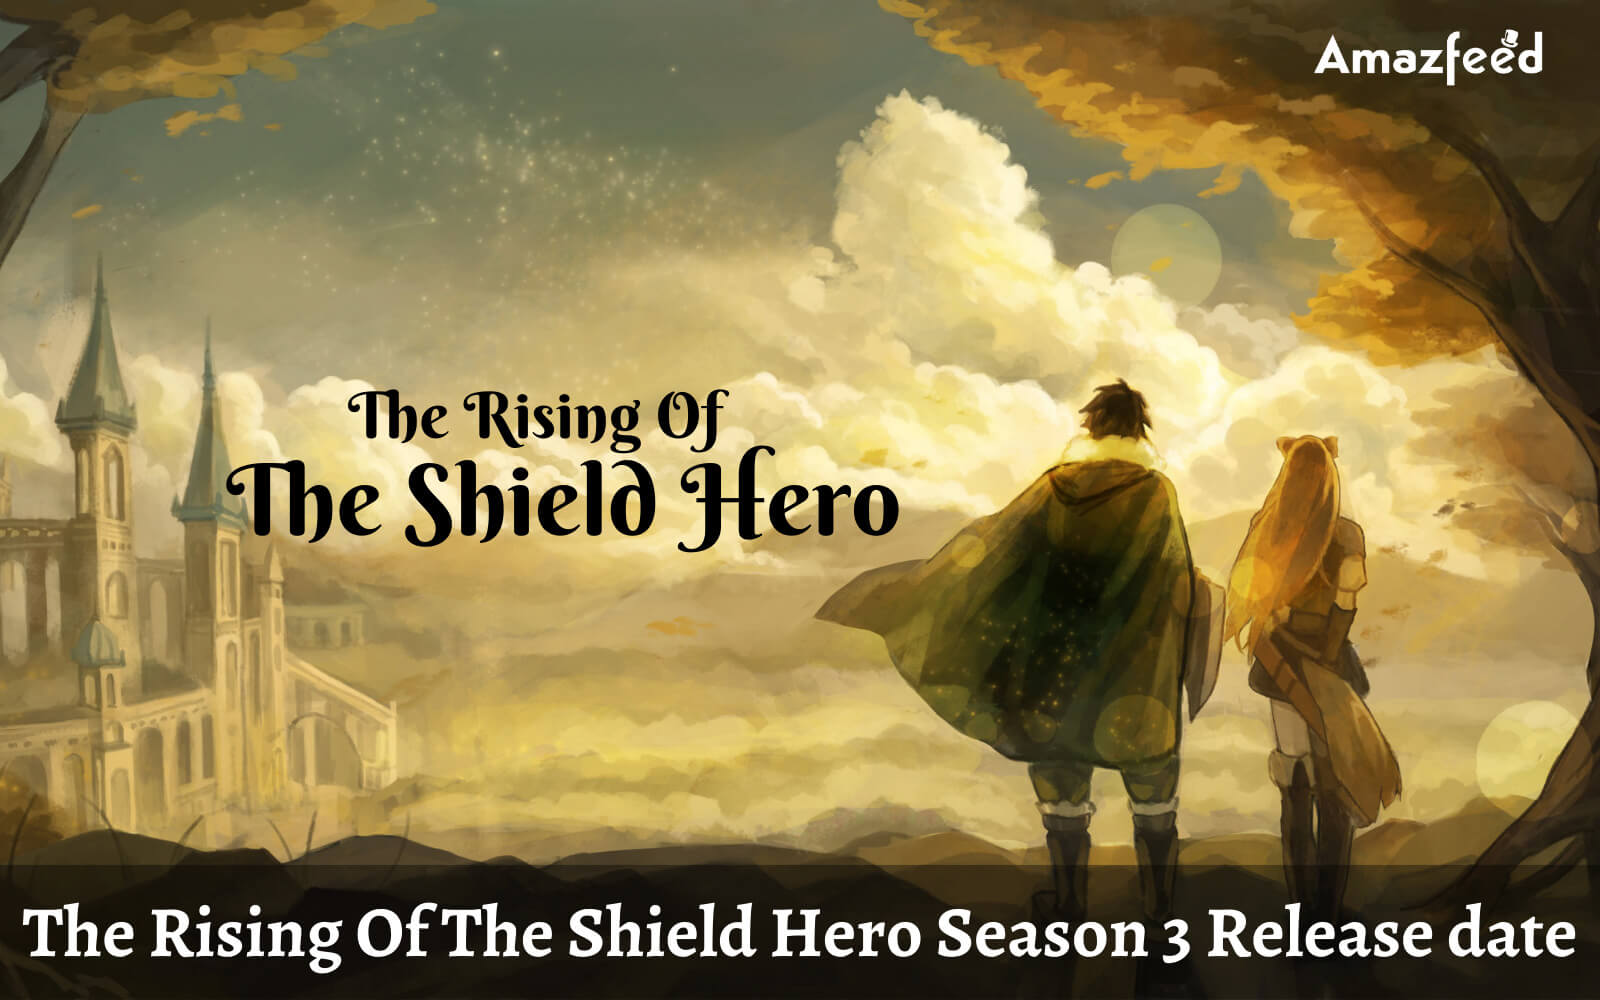 The Rising Of The Shield Hero Season 3 Release date